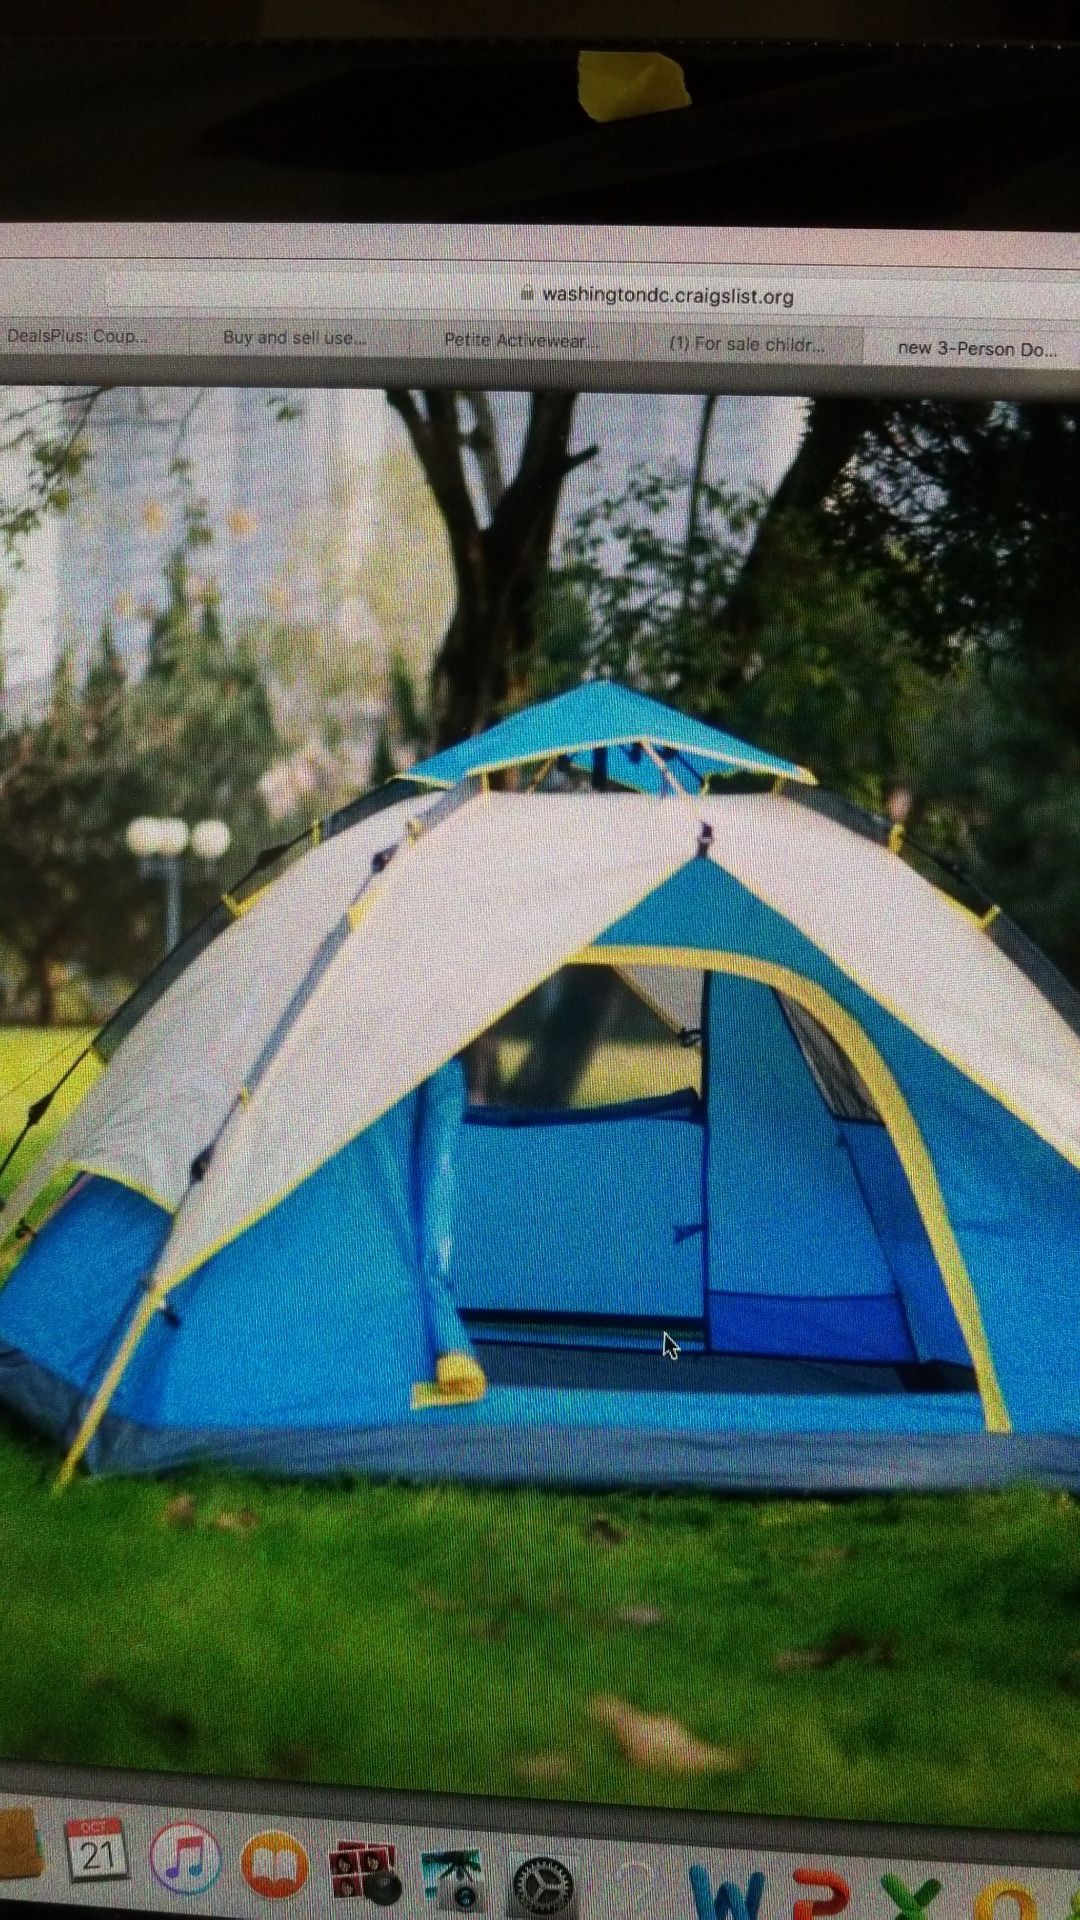 New 3 person tent